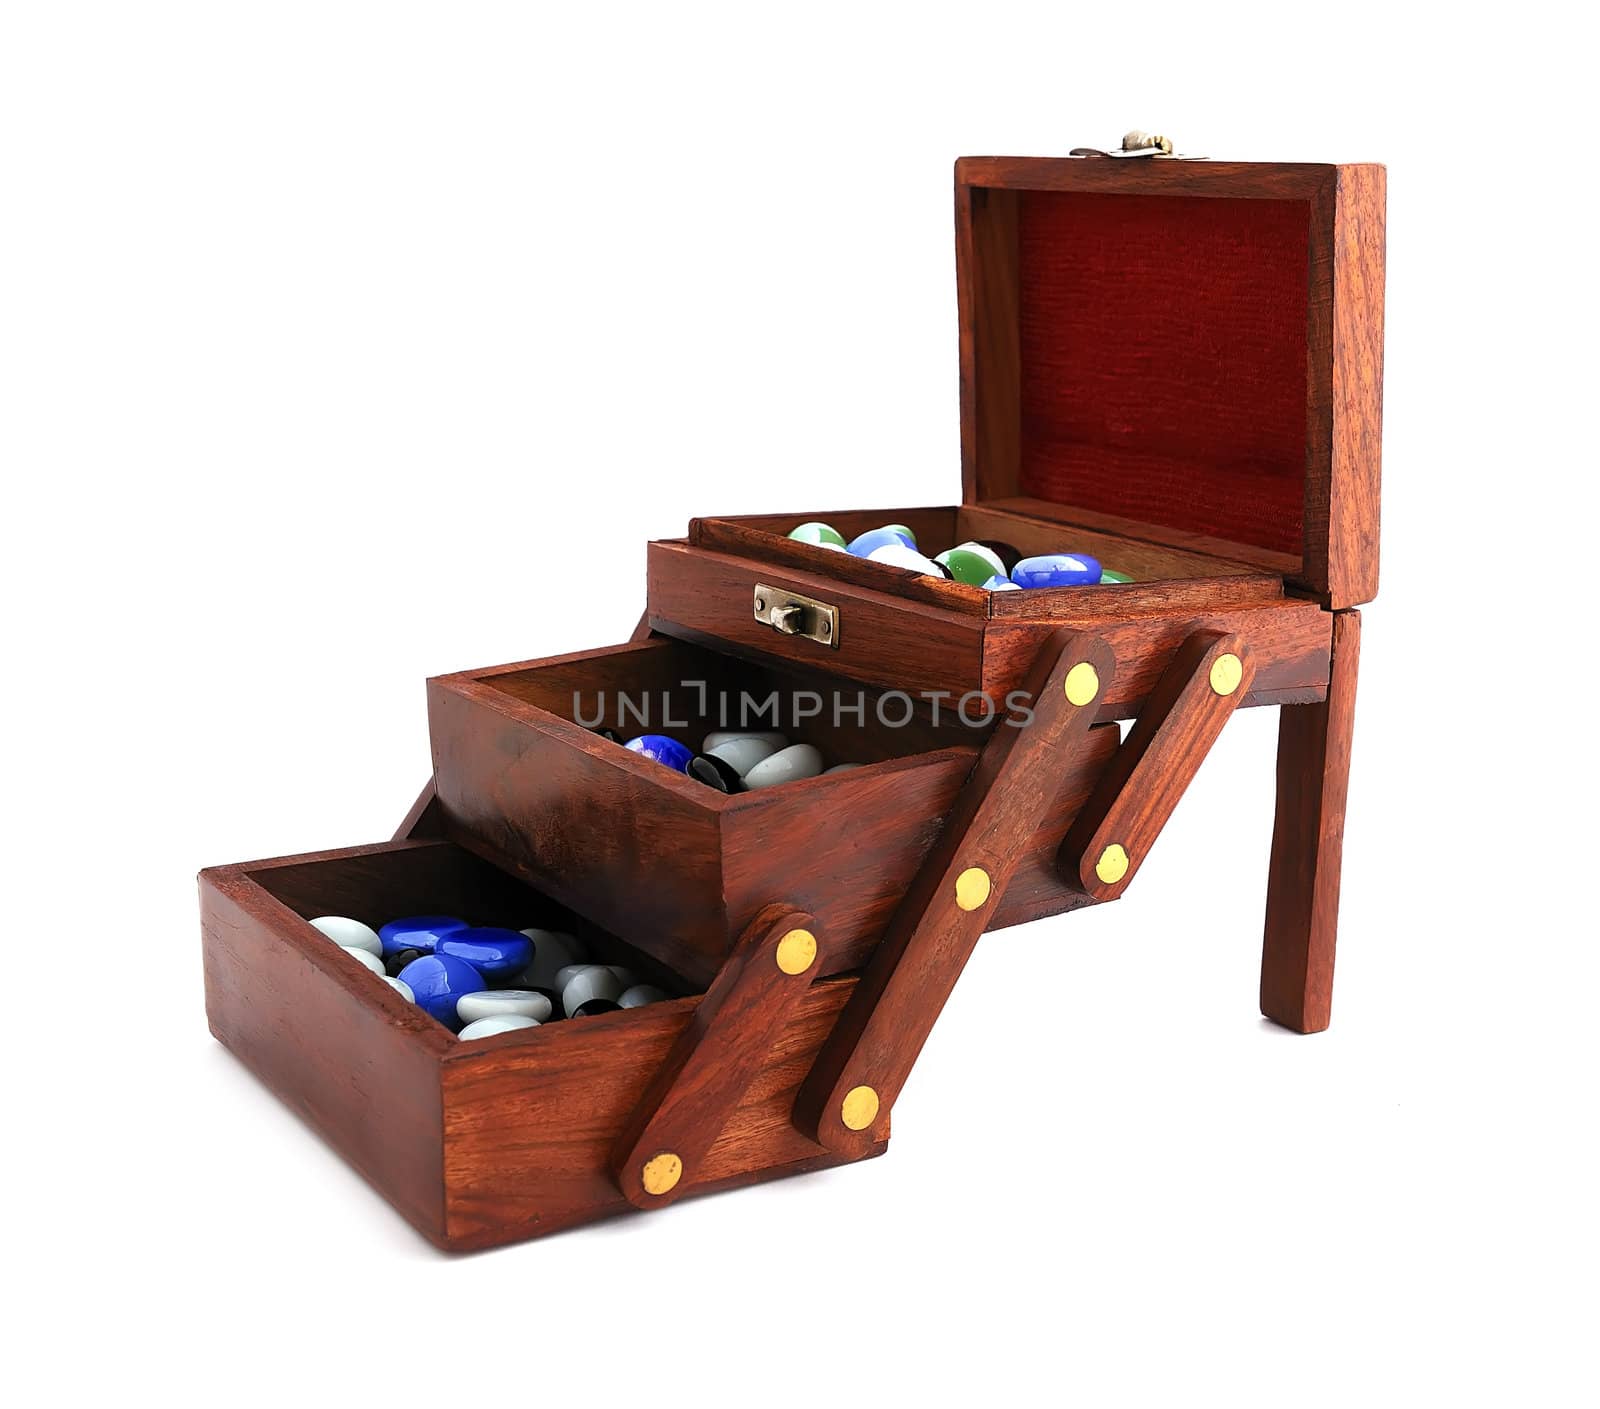 wooden box with colored stones on a white background